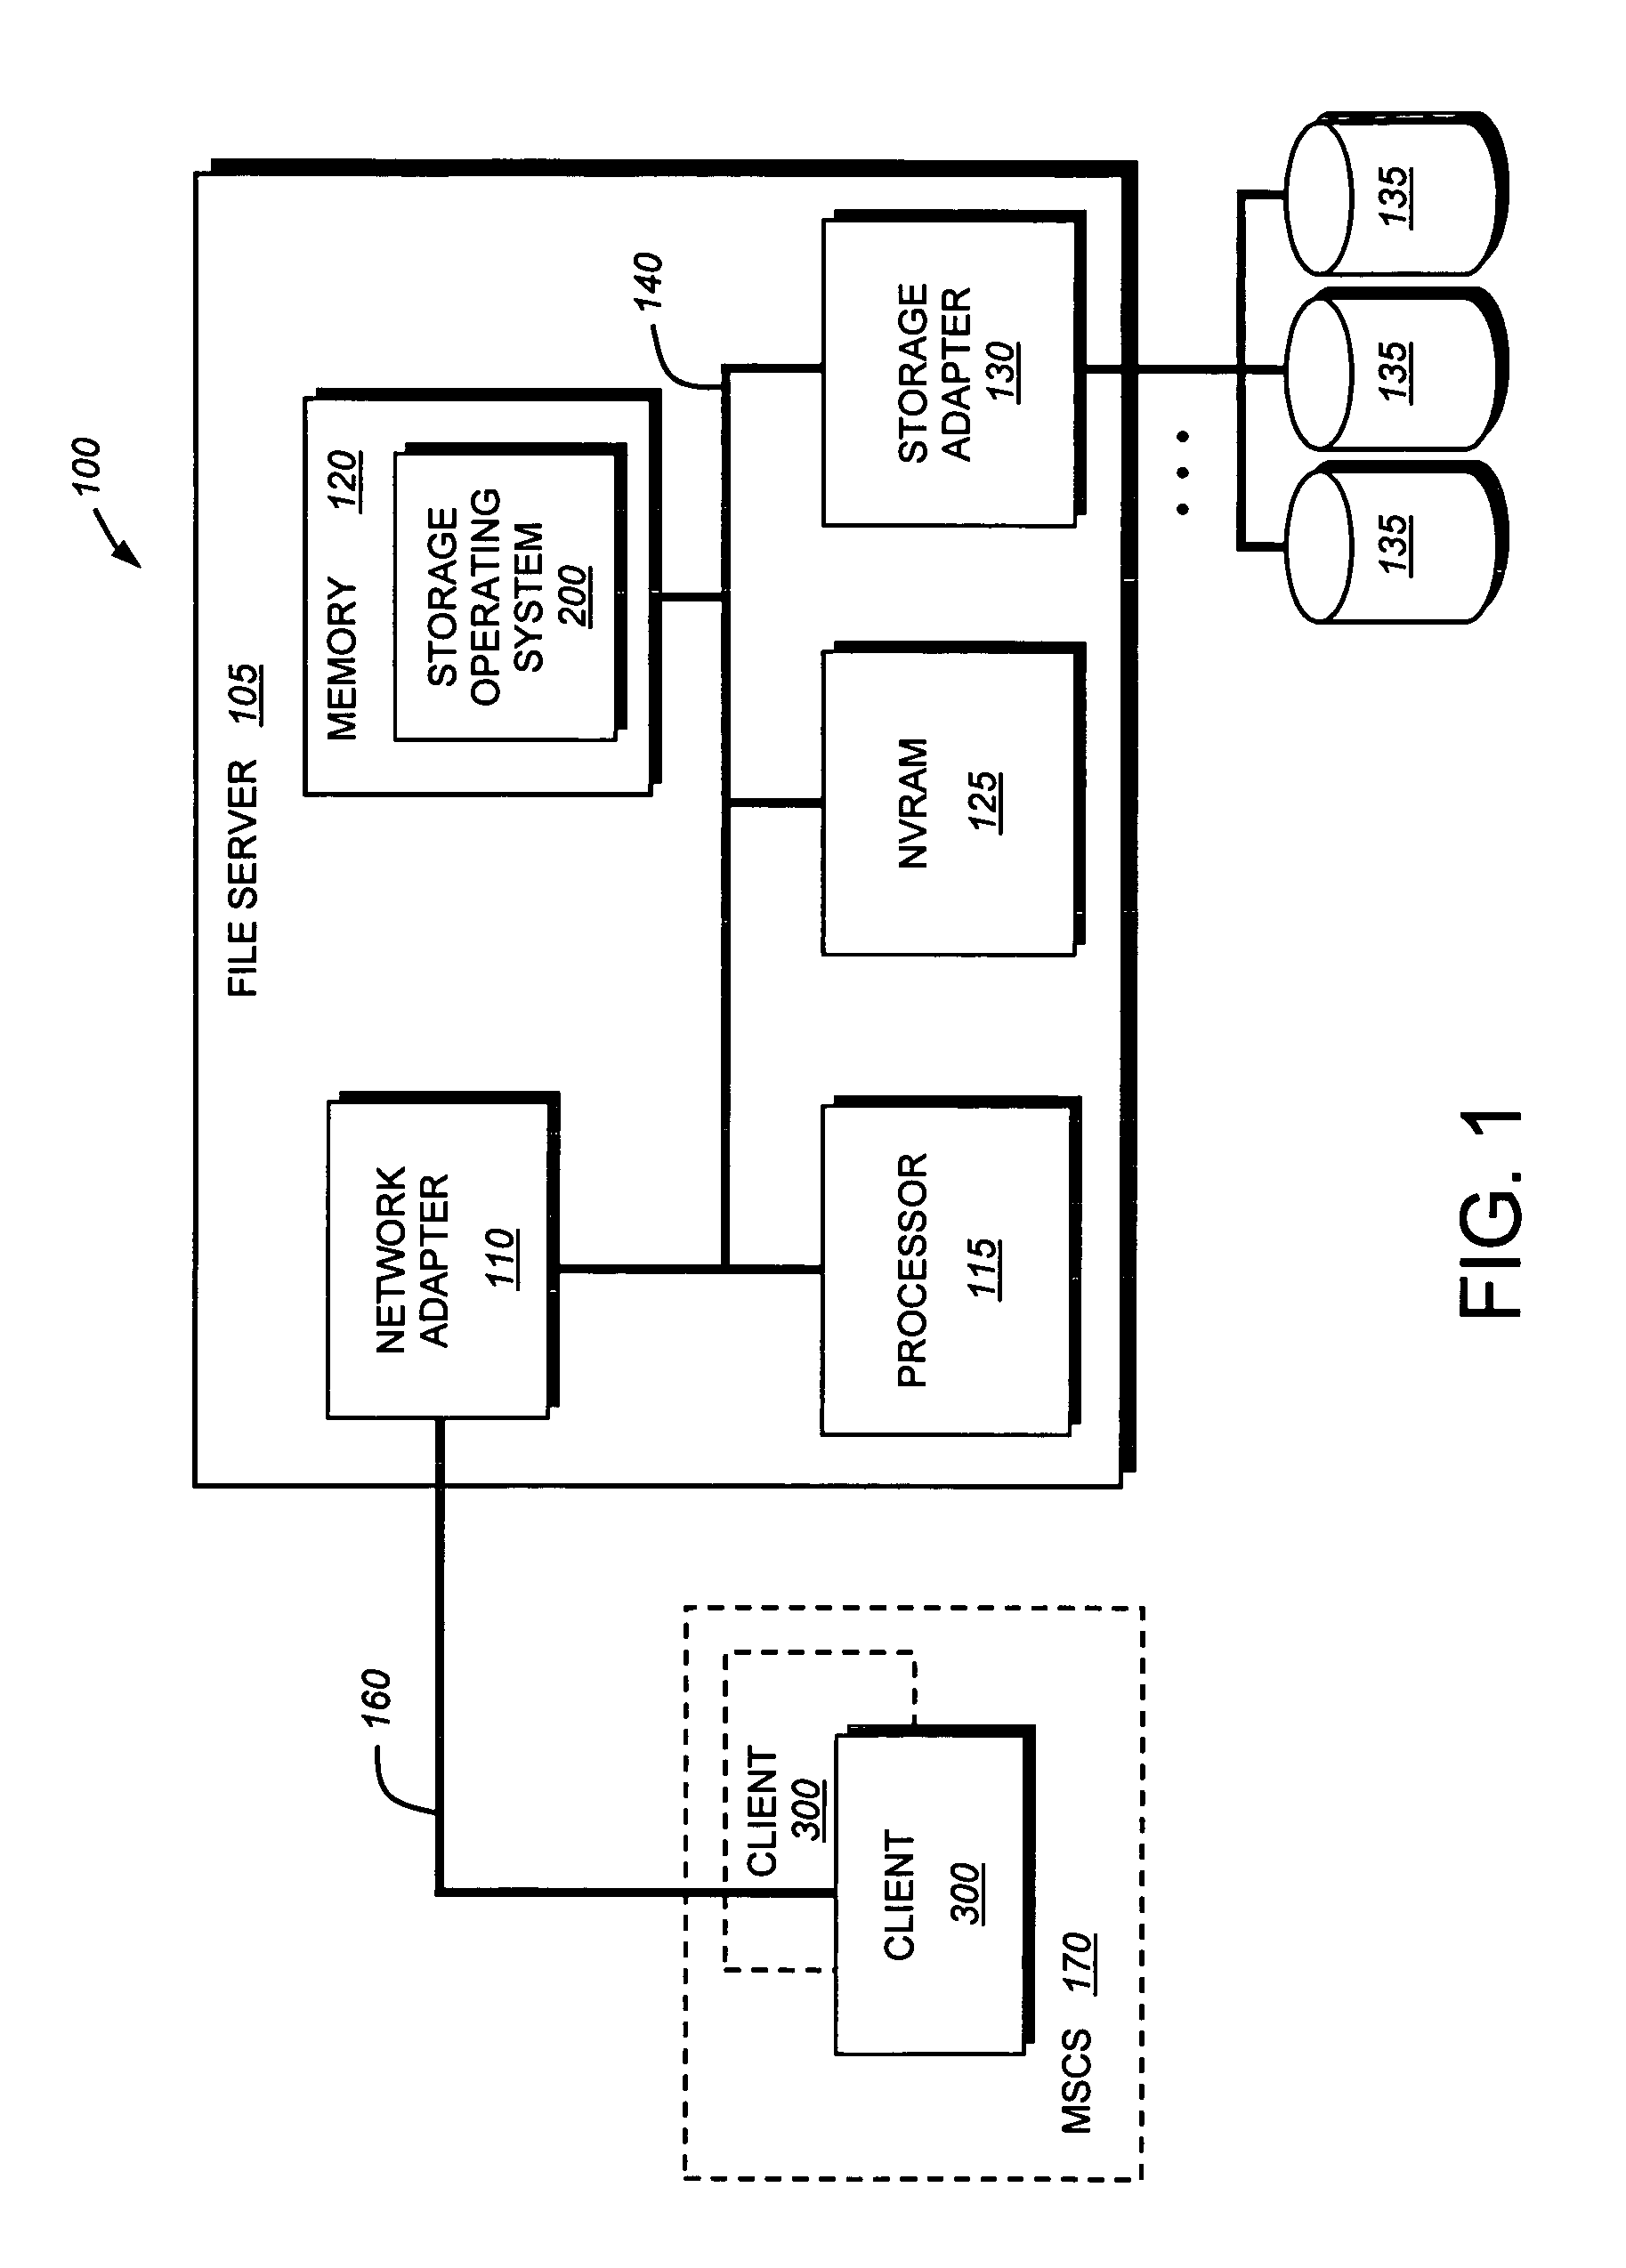 System and method for emulating SCSI reservations using network file access protocols